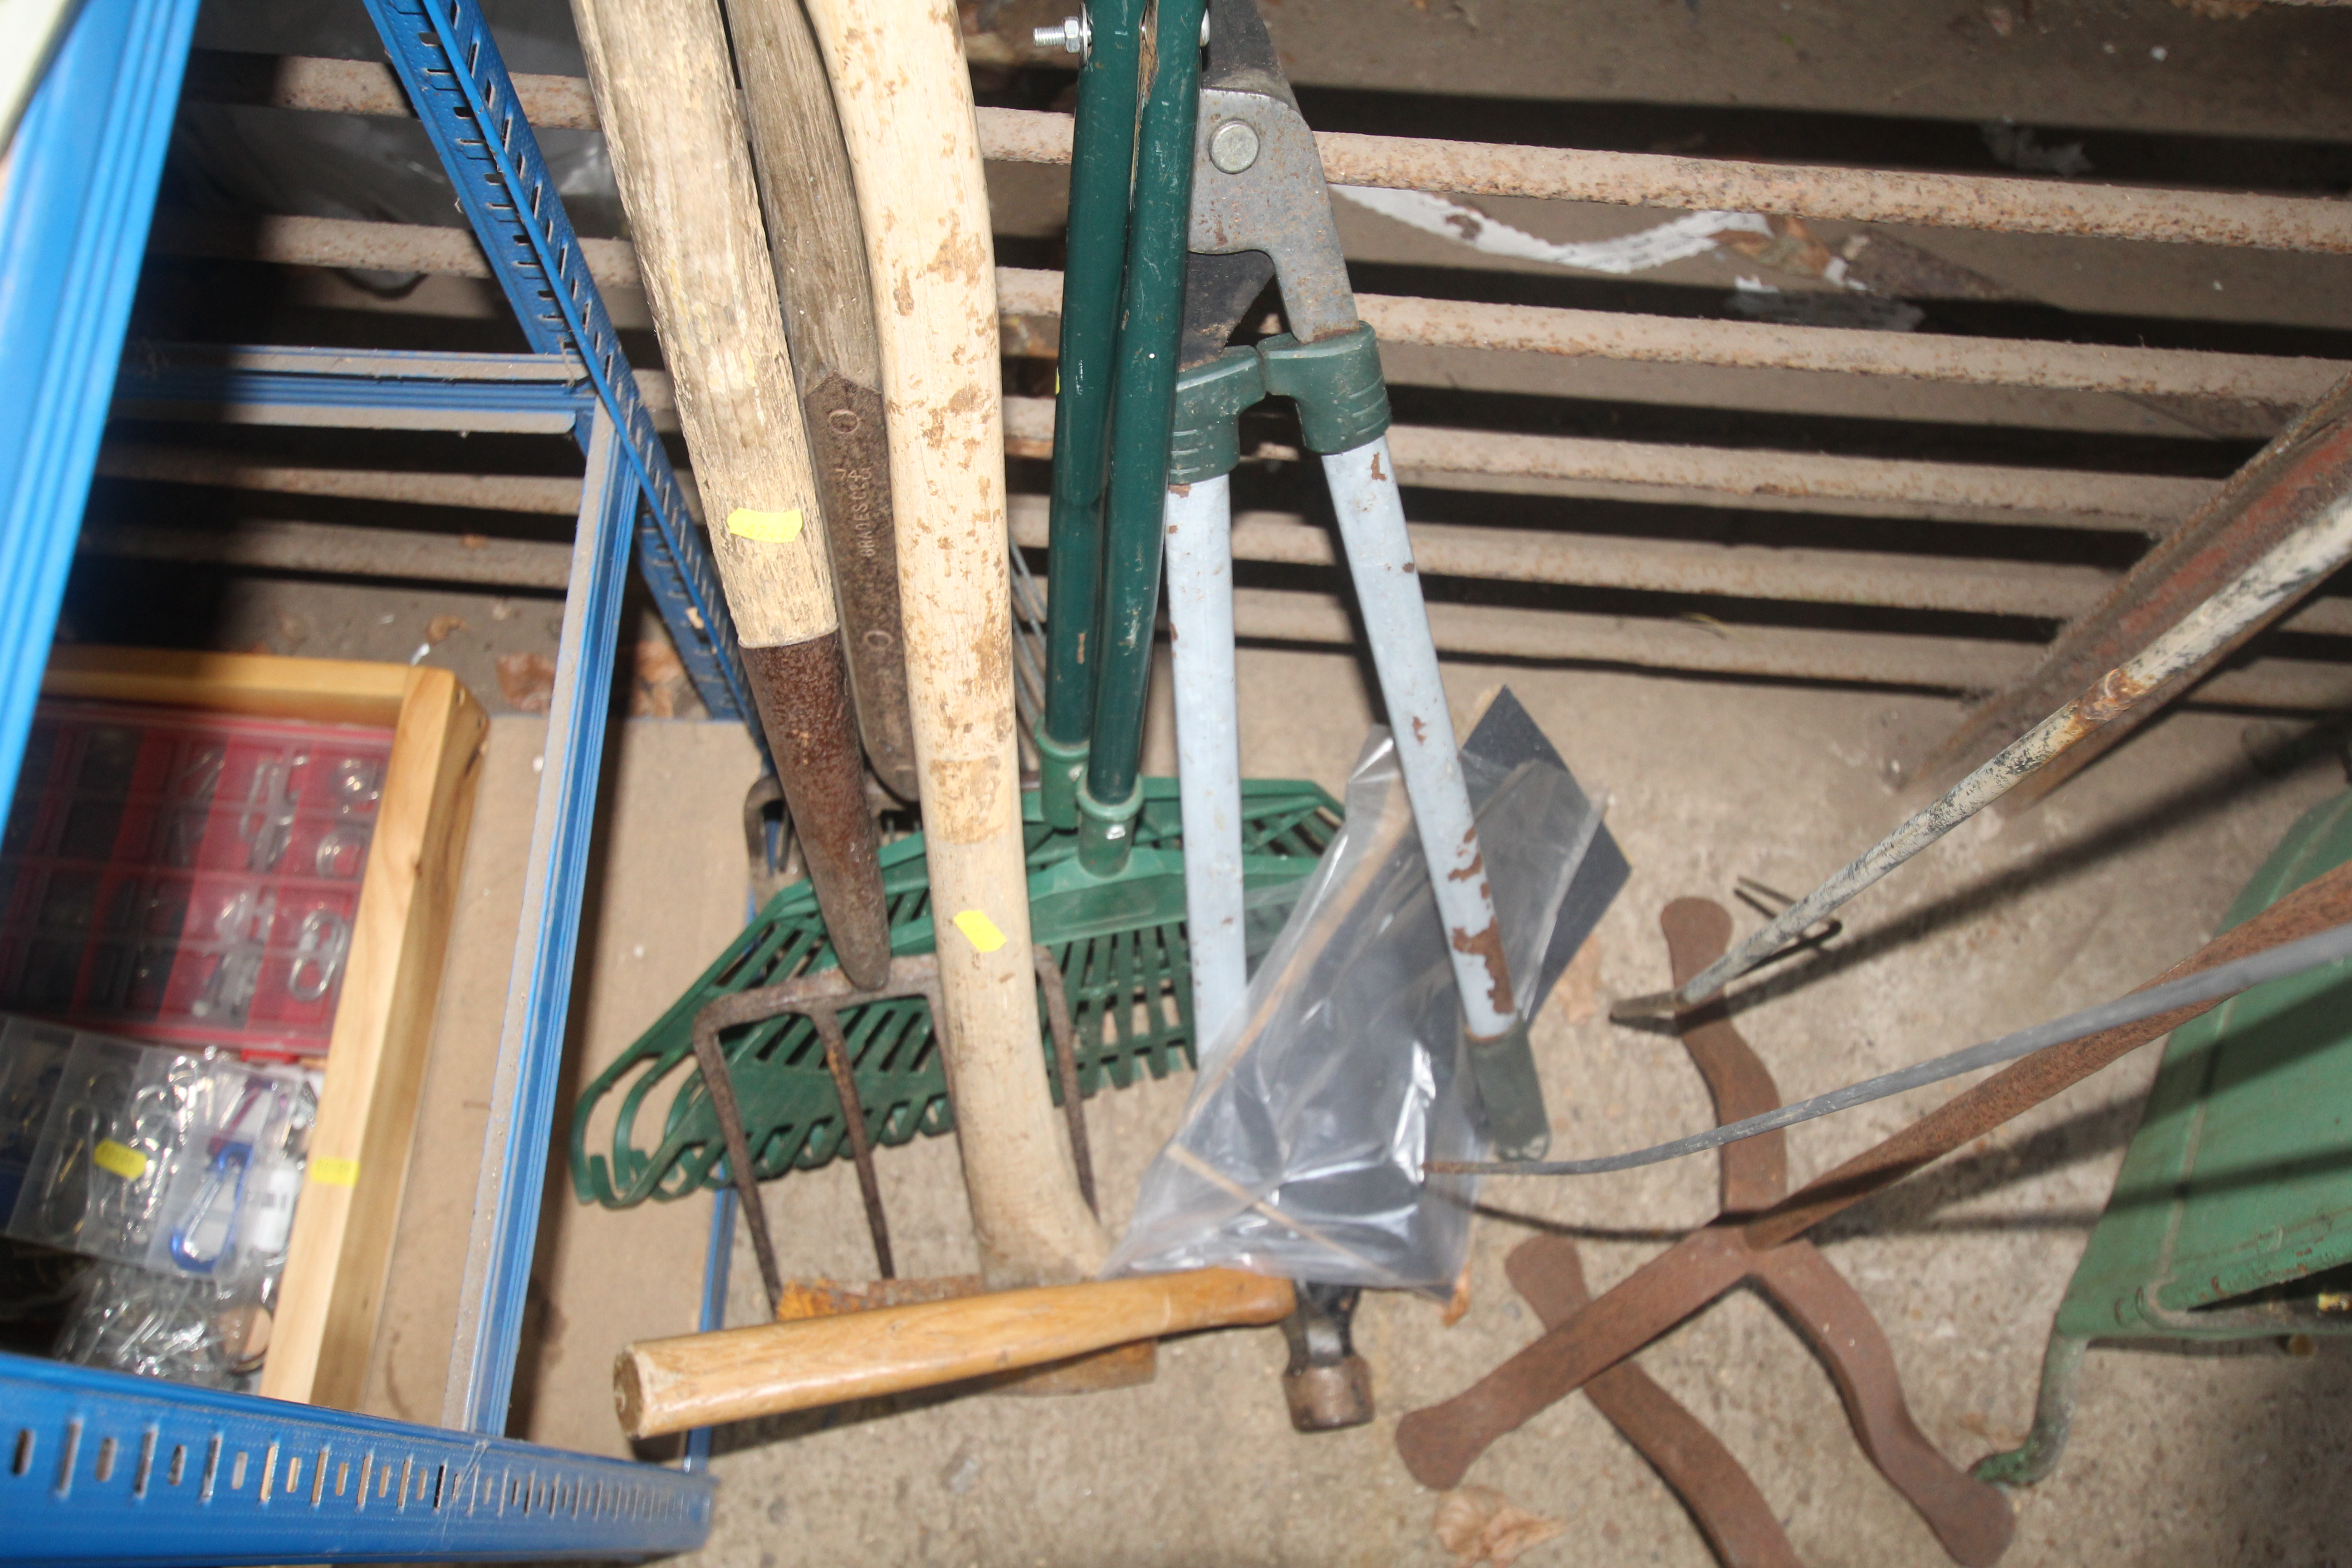 A quantity of gardening tools to include digging fork, axe, rakes, loppers etc. - Image 2 of 2